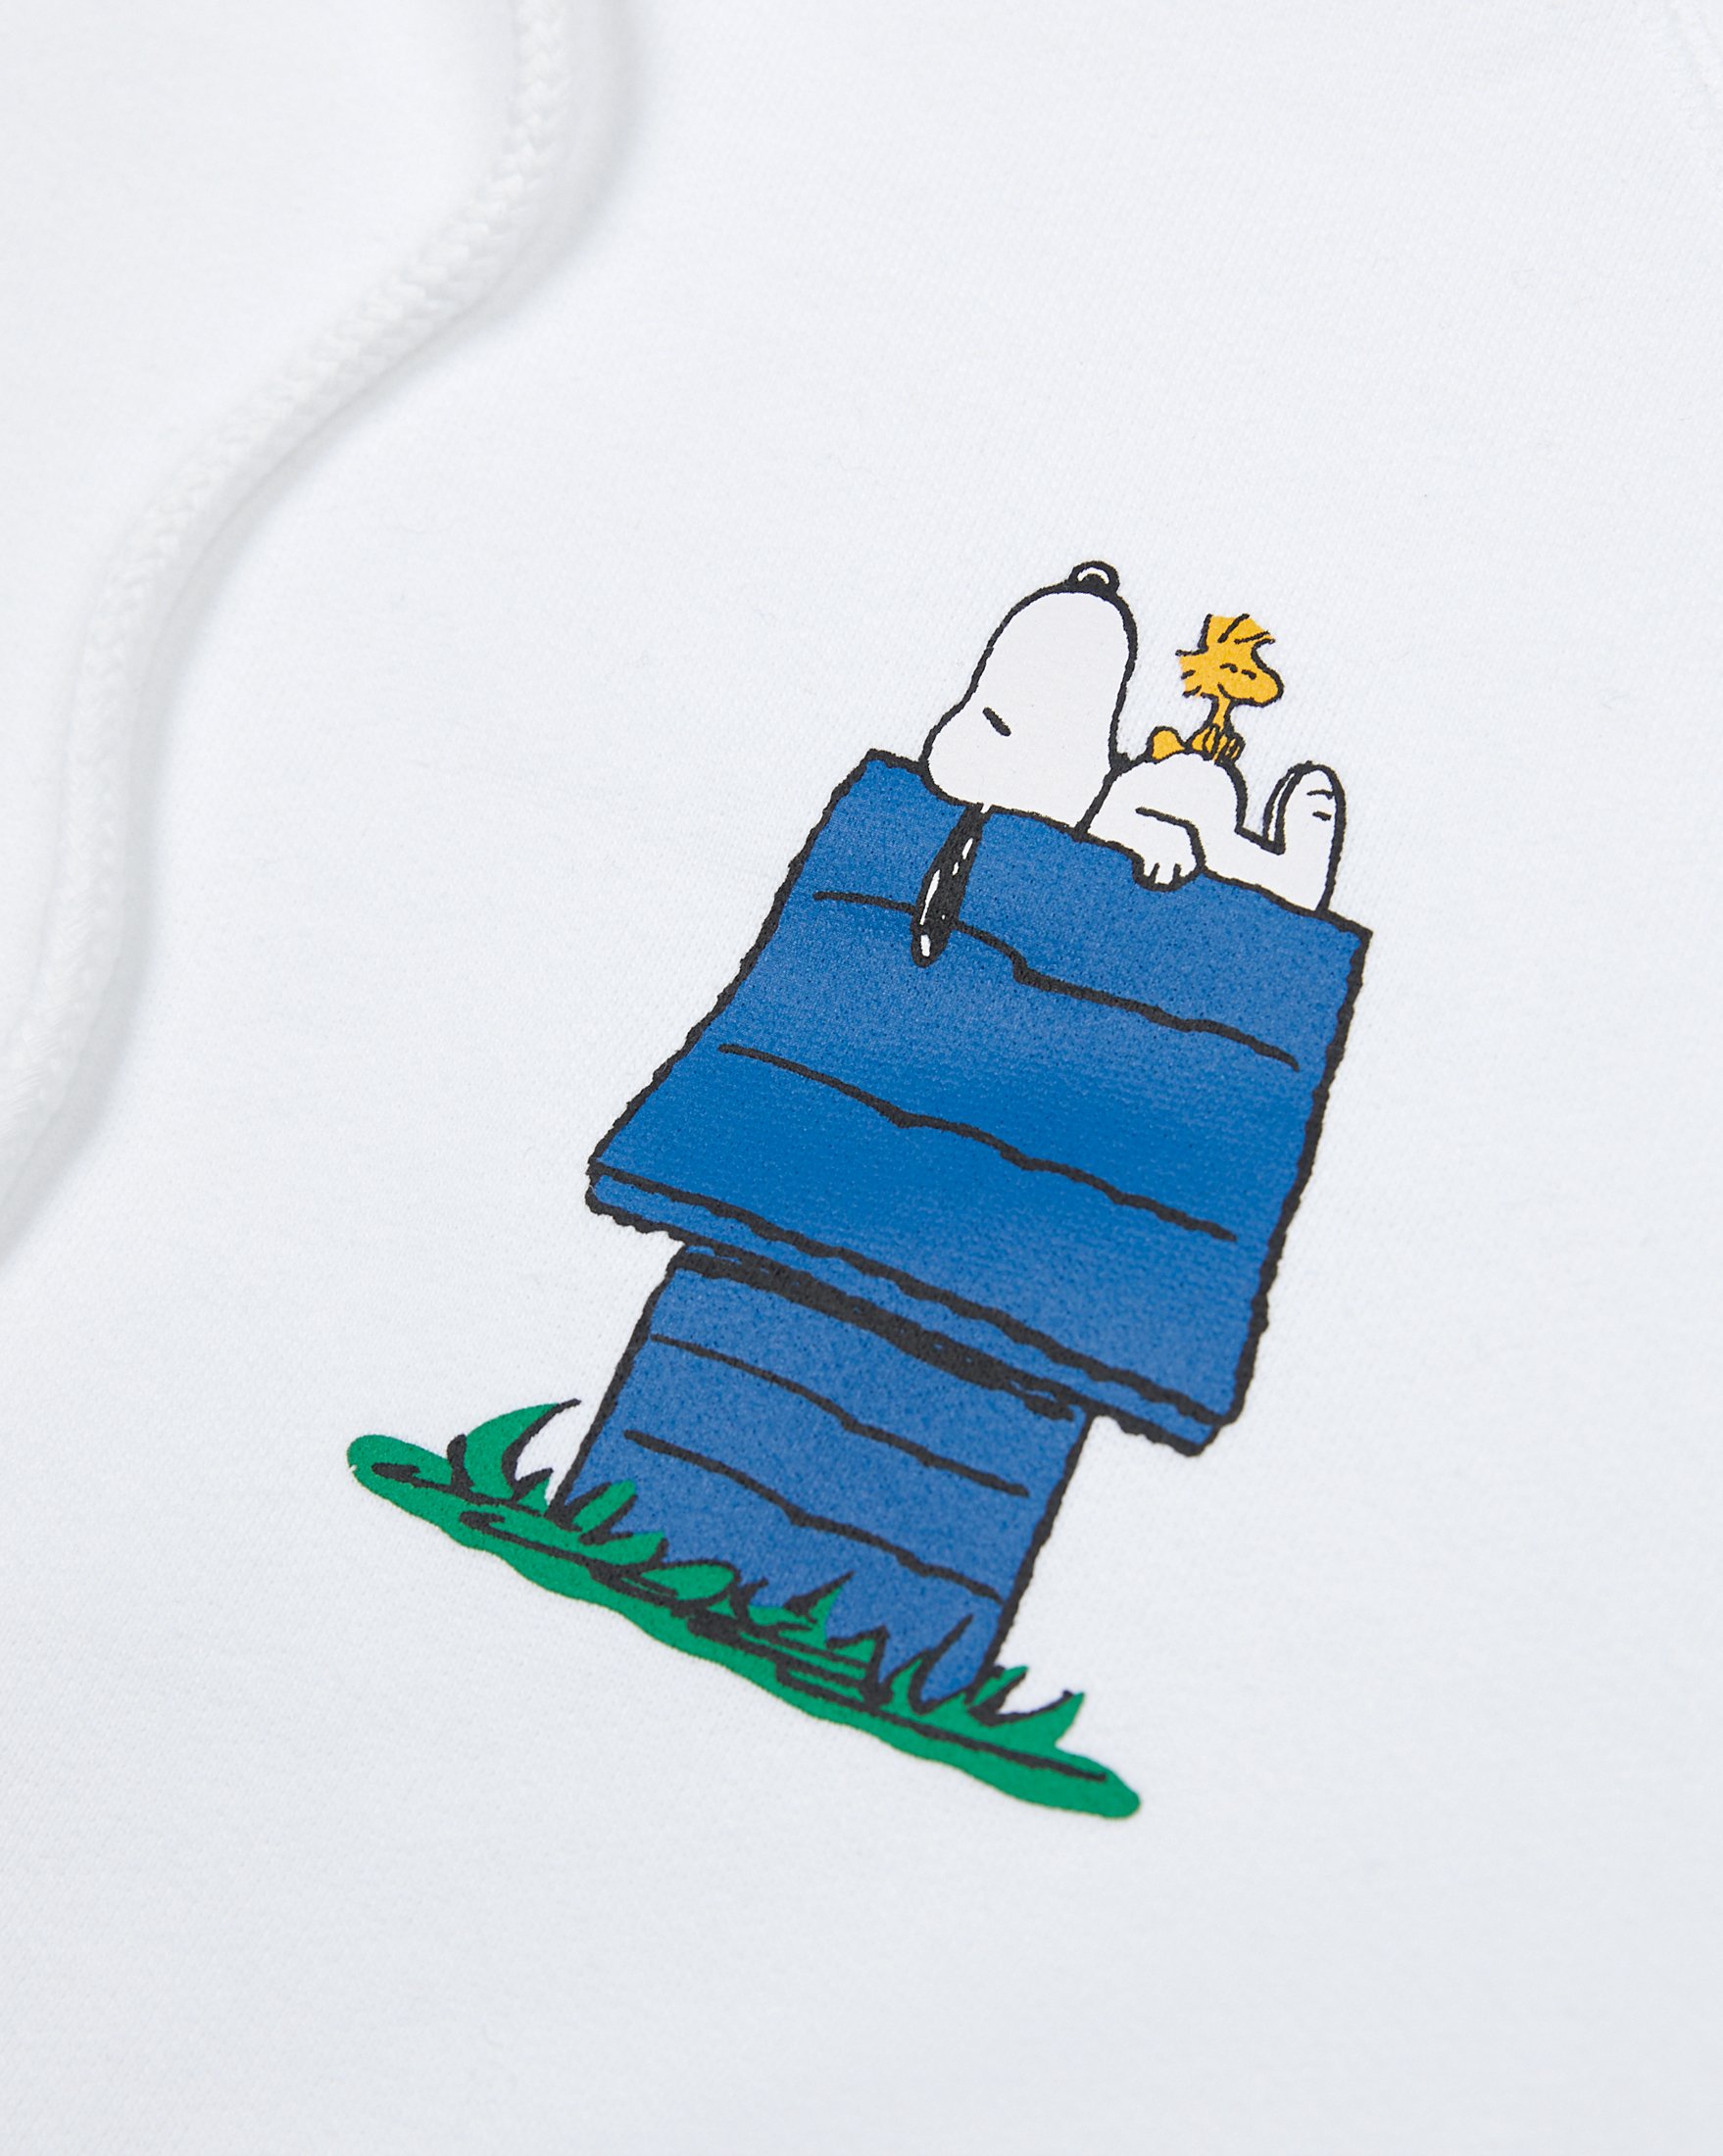 Colette Mon Amour x Soulland - Snoopy Bed White Hoodie - Clothing - White - Image 4